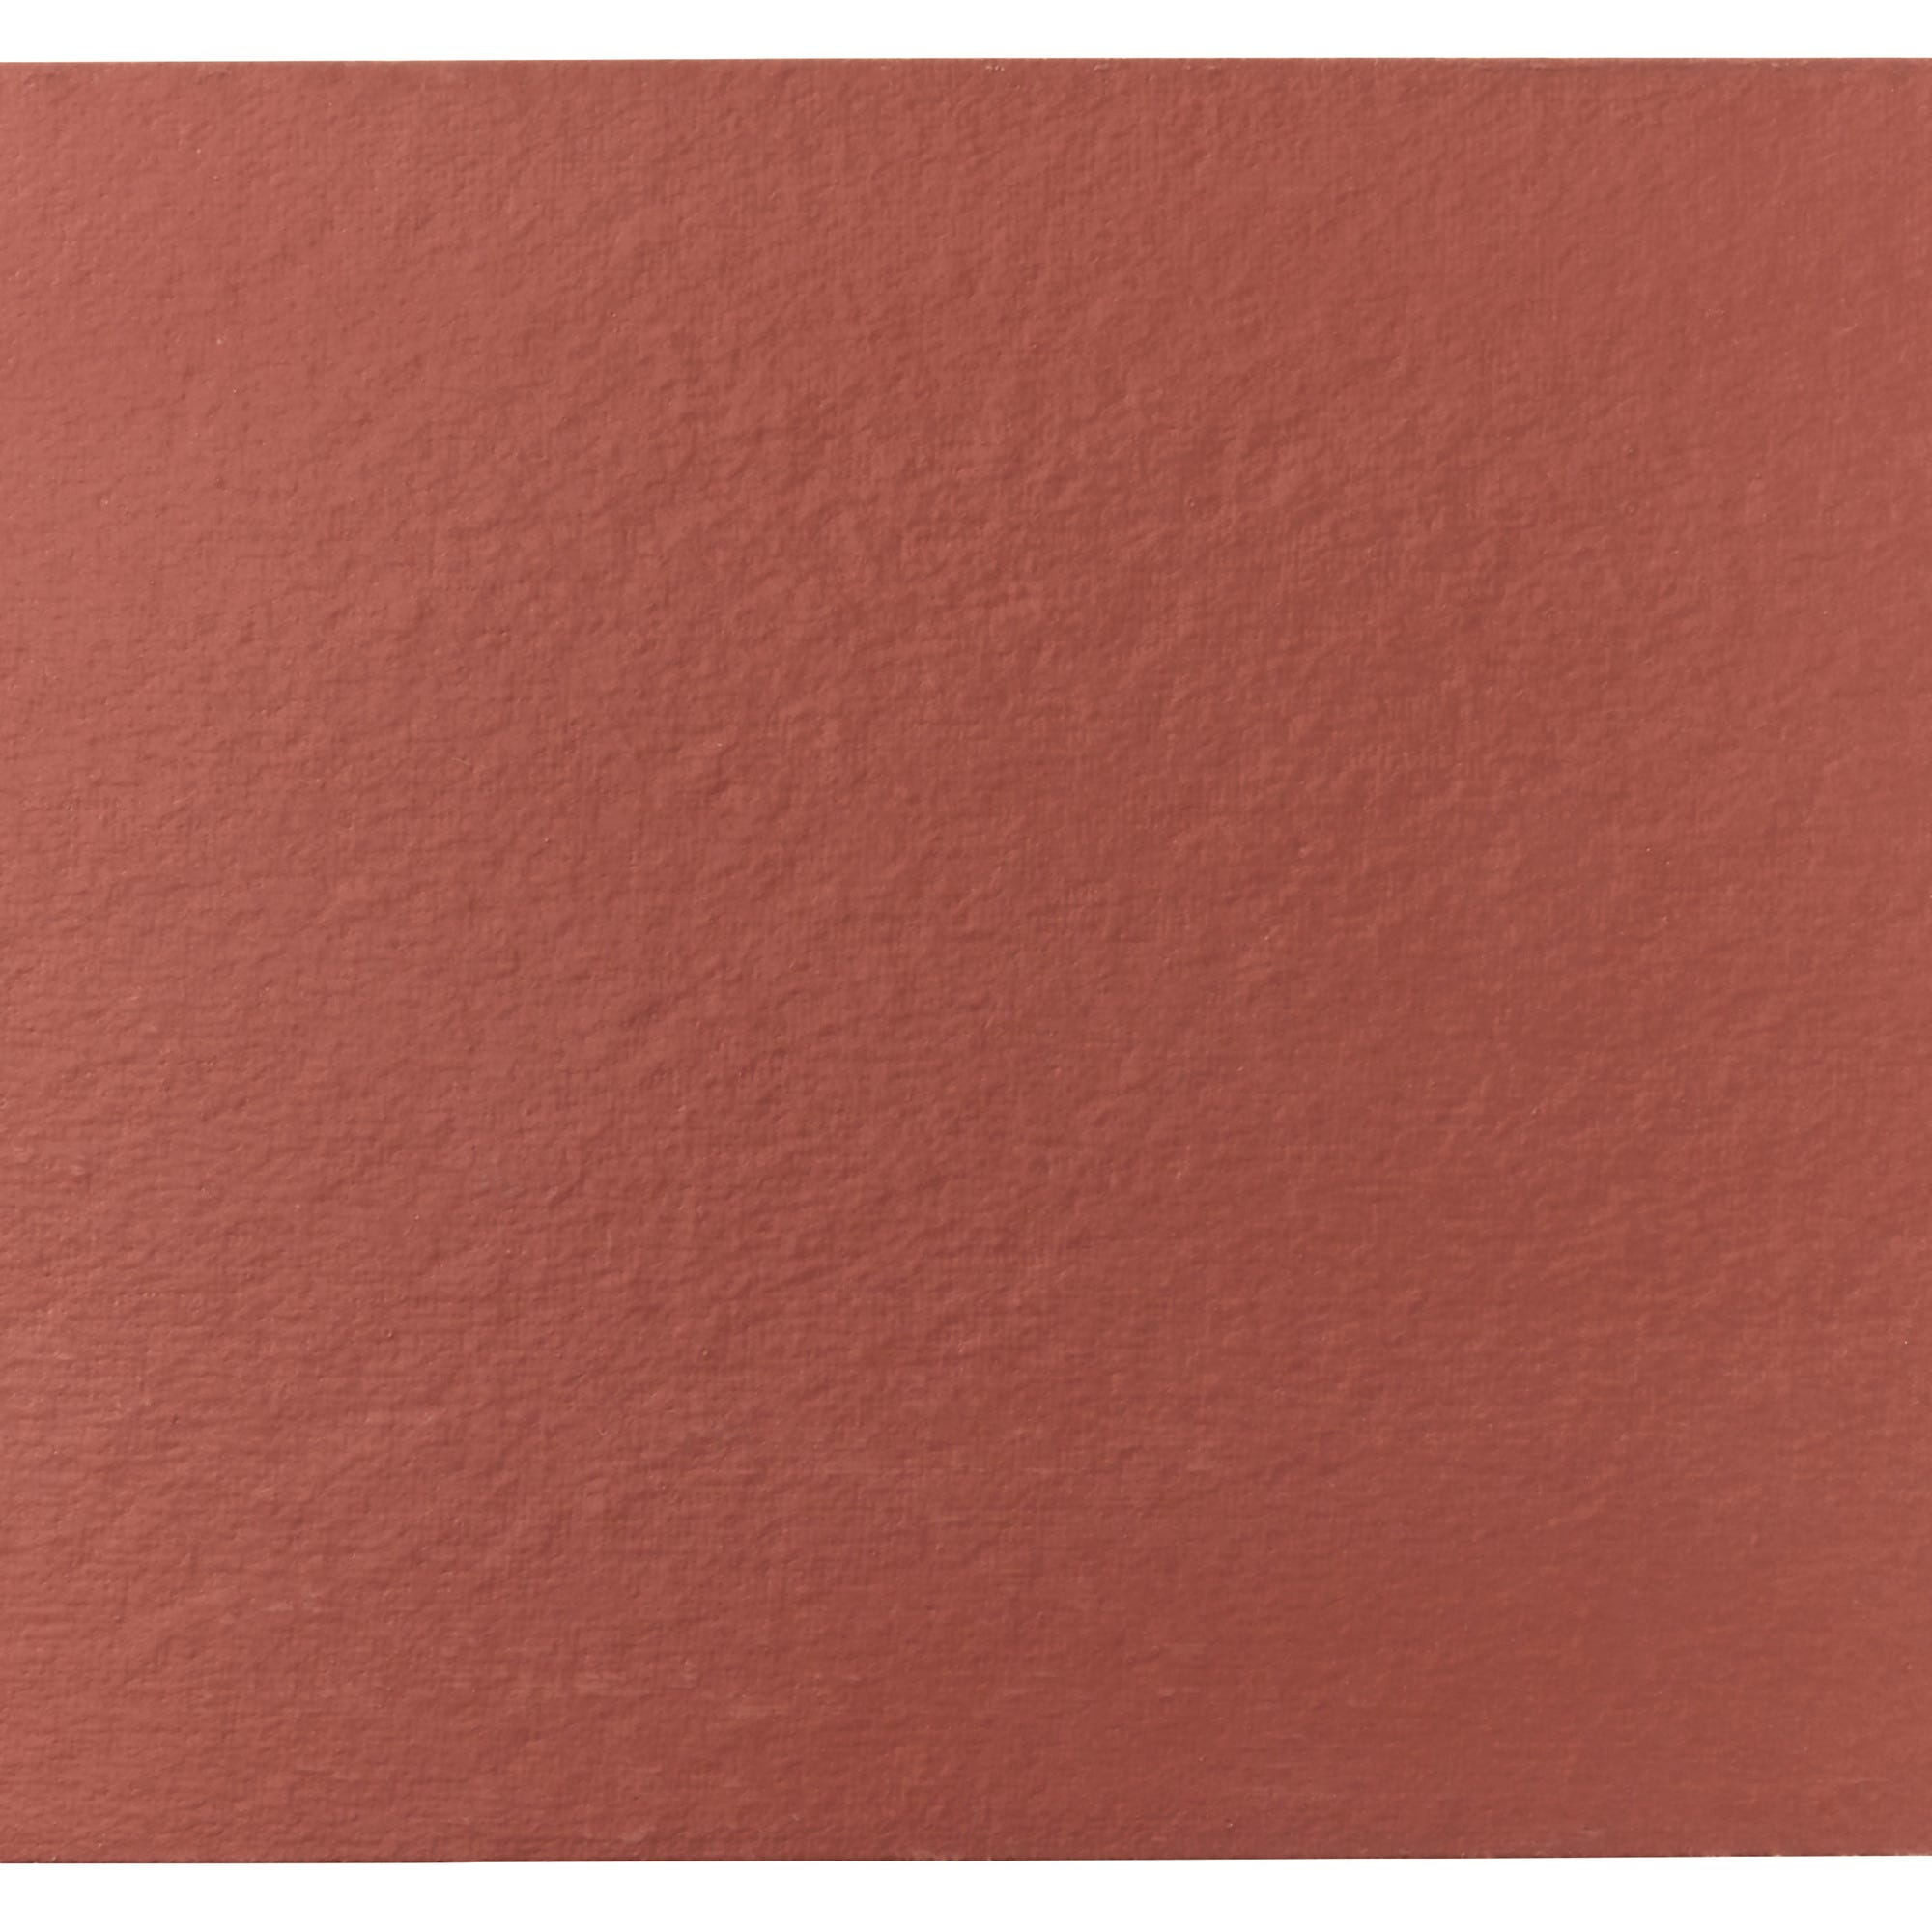 Clin pour bardage rouge traditionnel L.3600 × l.180 × Ep.8 mm HardiePlank Smooth 4